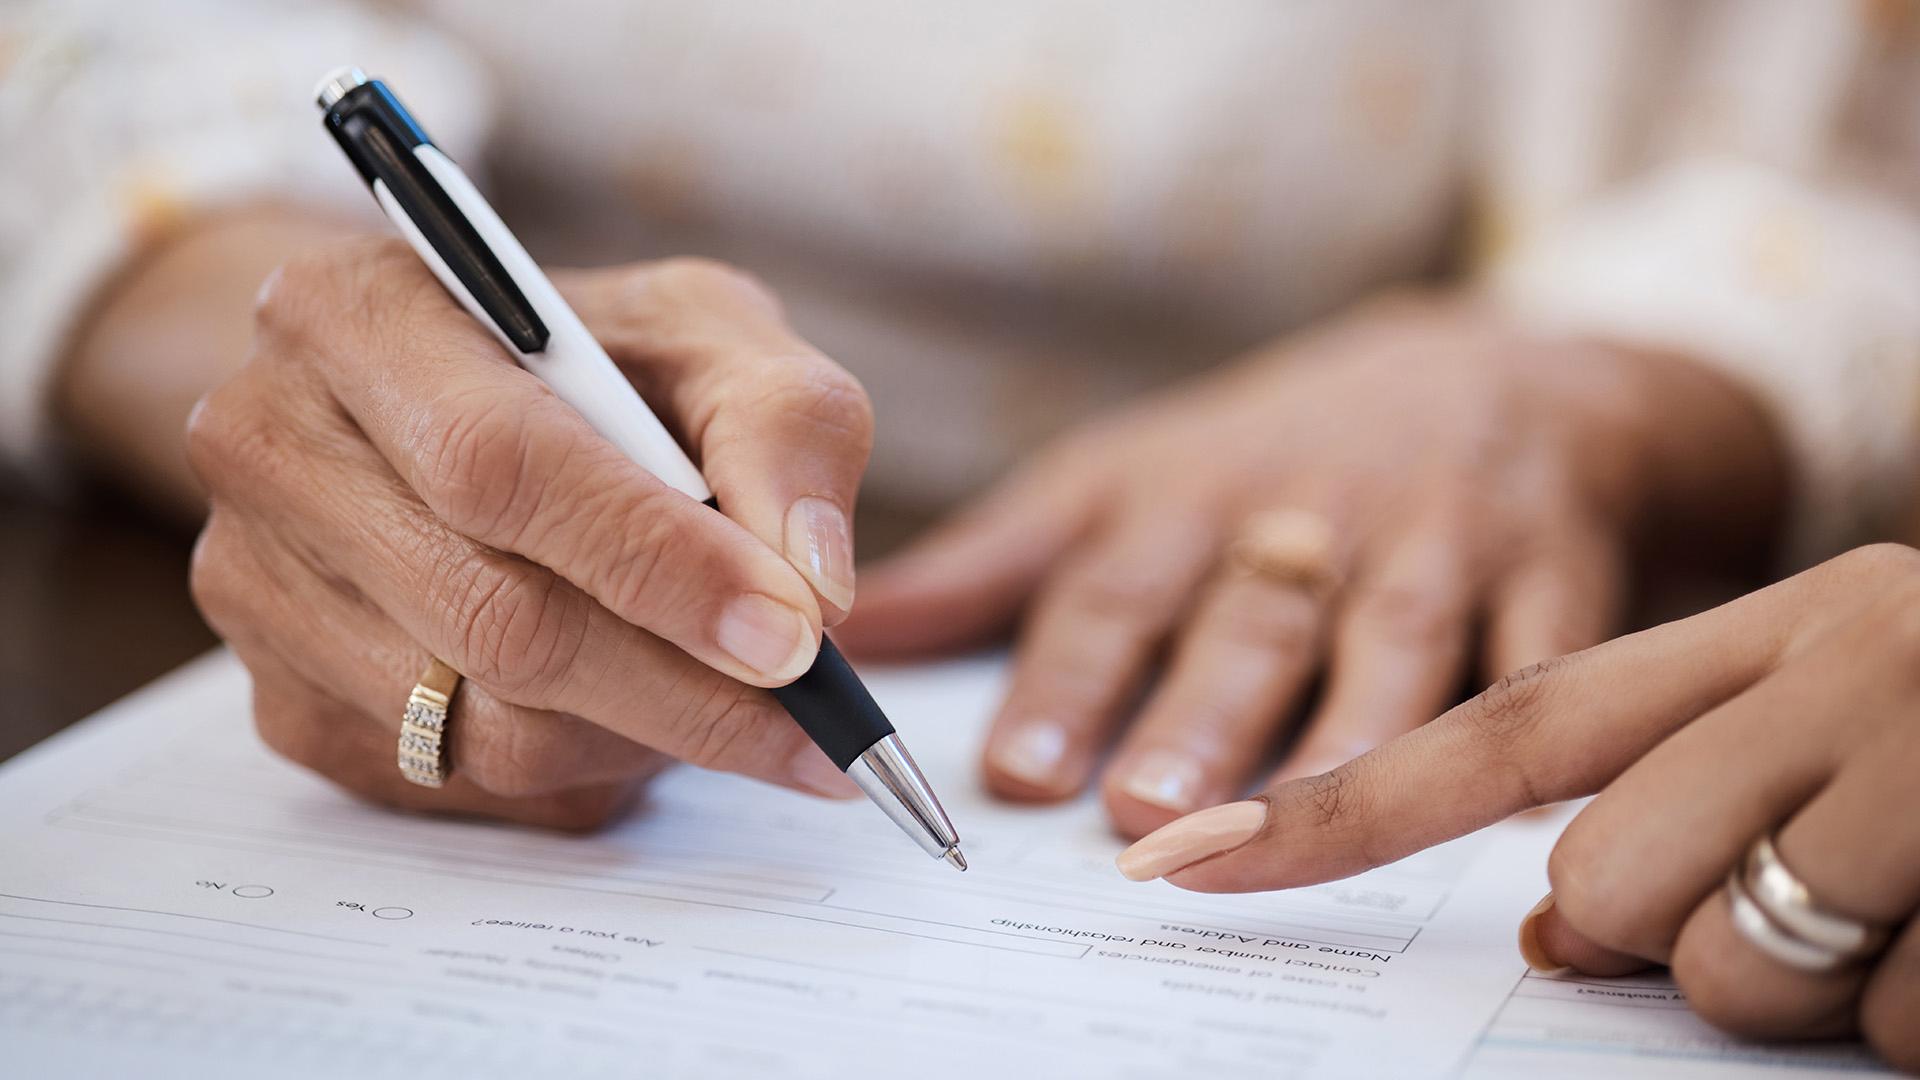 Hands holding a pen and pointing to an area on a legal document to sign.